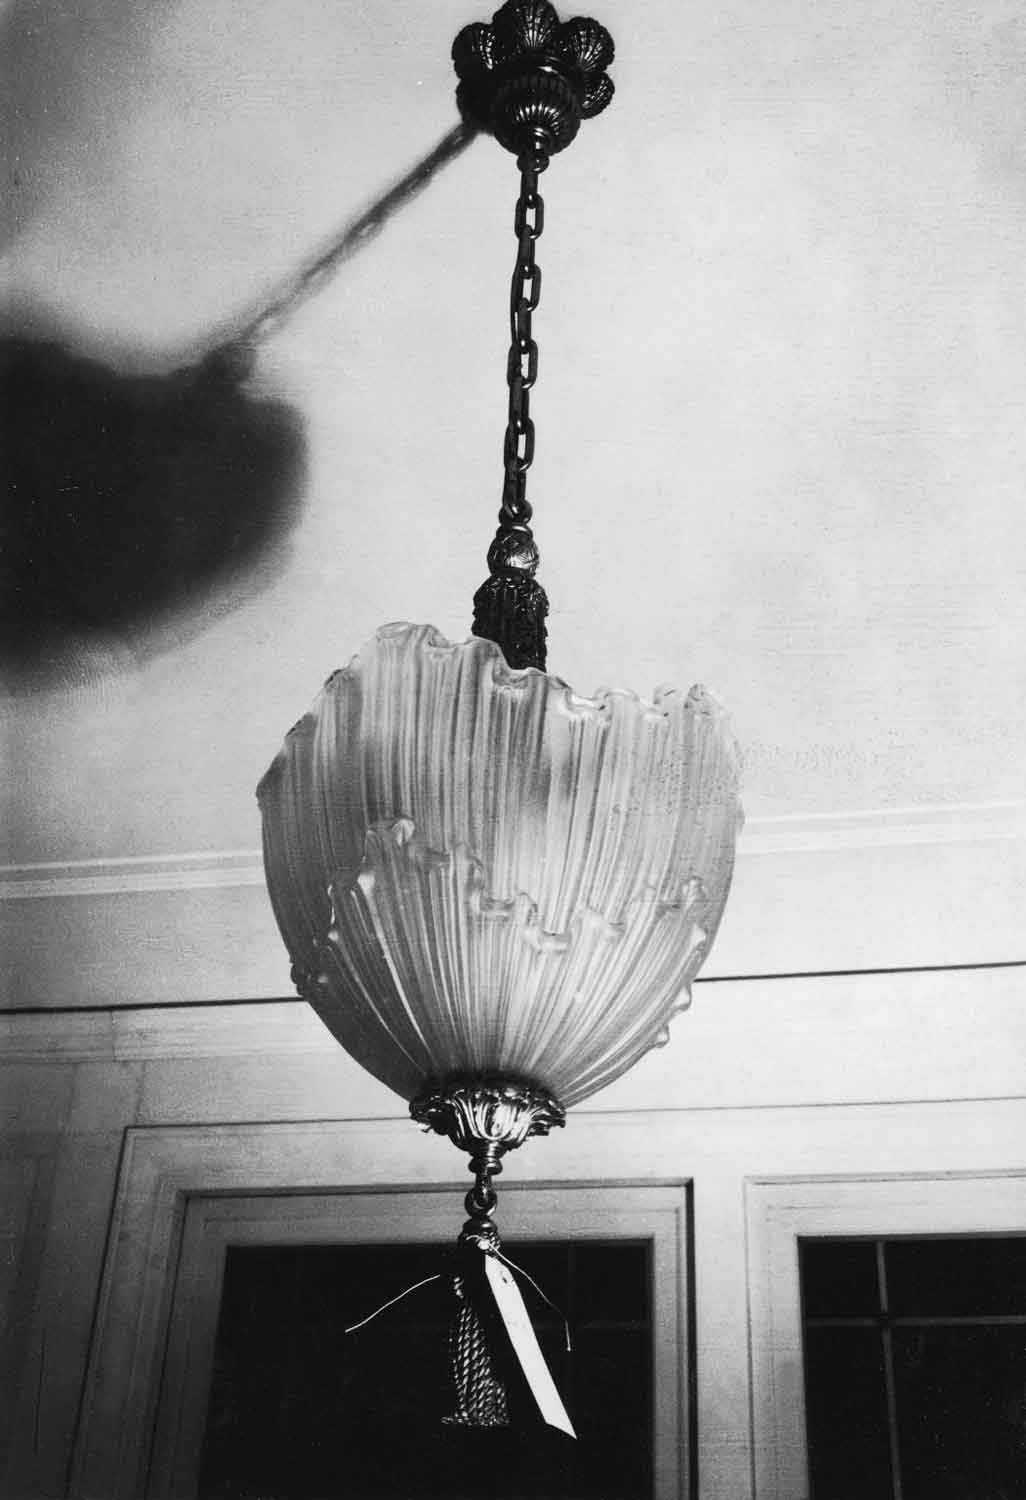 Black-and-white photograph of a light fixture